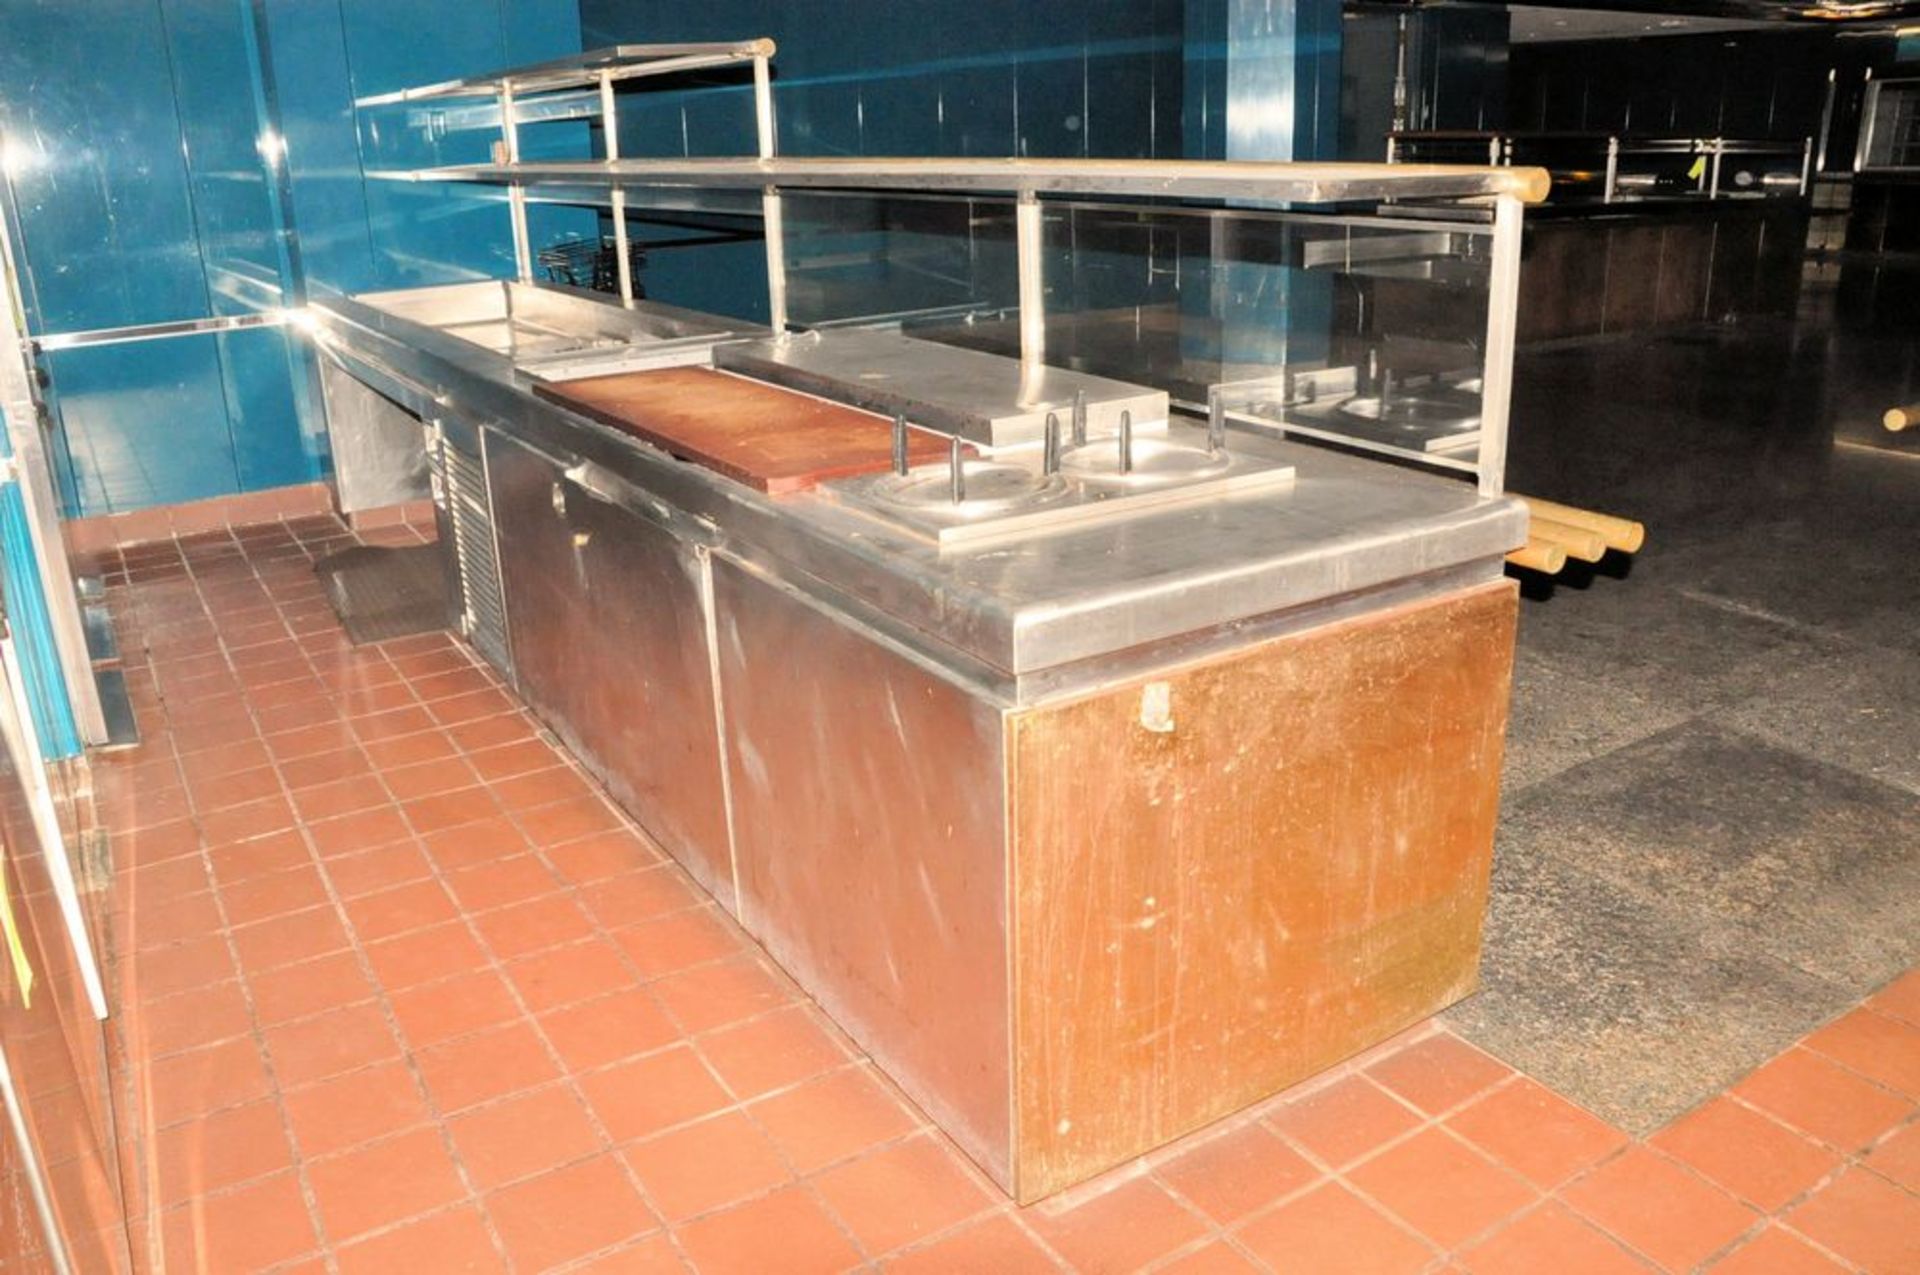 Stainless Steel Cold Sandwich Server Station, 3' x 16', with Overhead Sneeze Guard, (Main Kitchen - Image 2 of 4